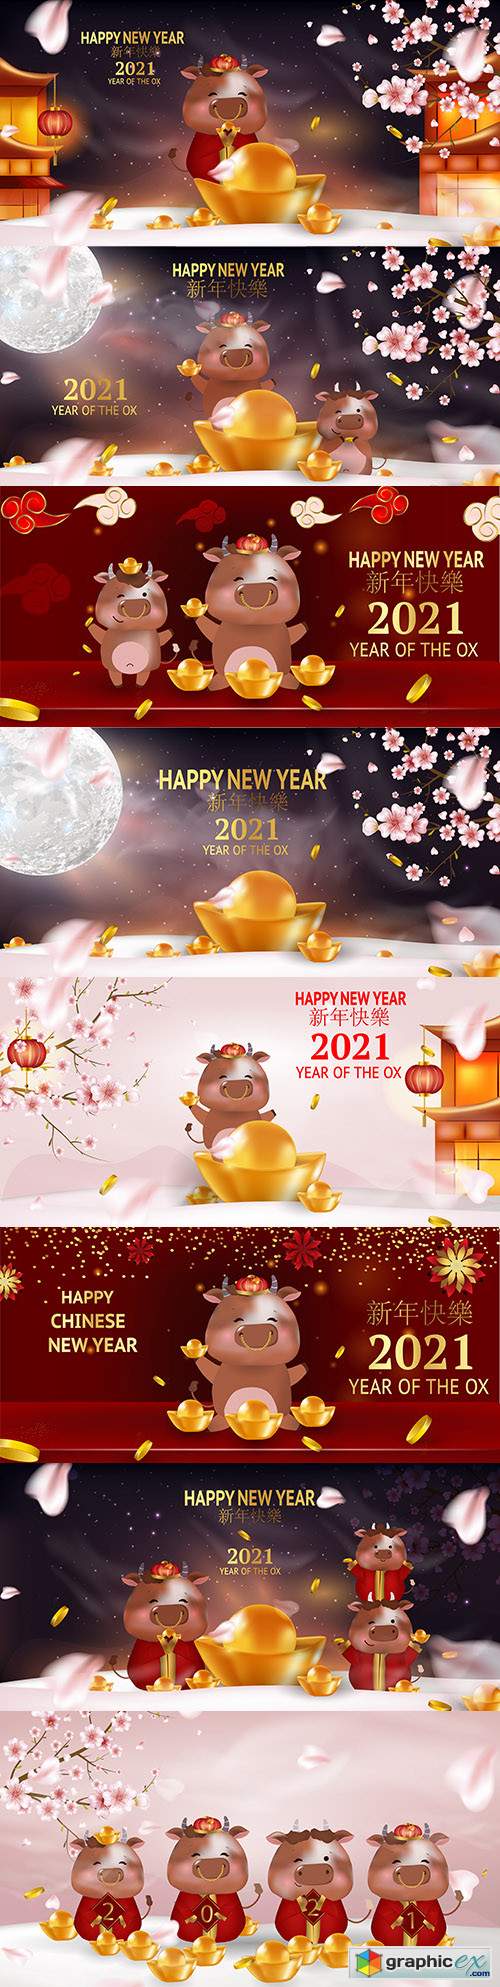  Greeting card for Chinese New Year of Bull 2021 